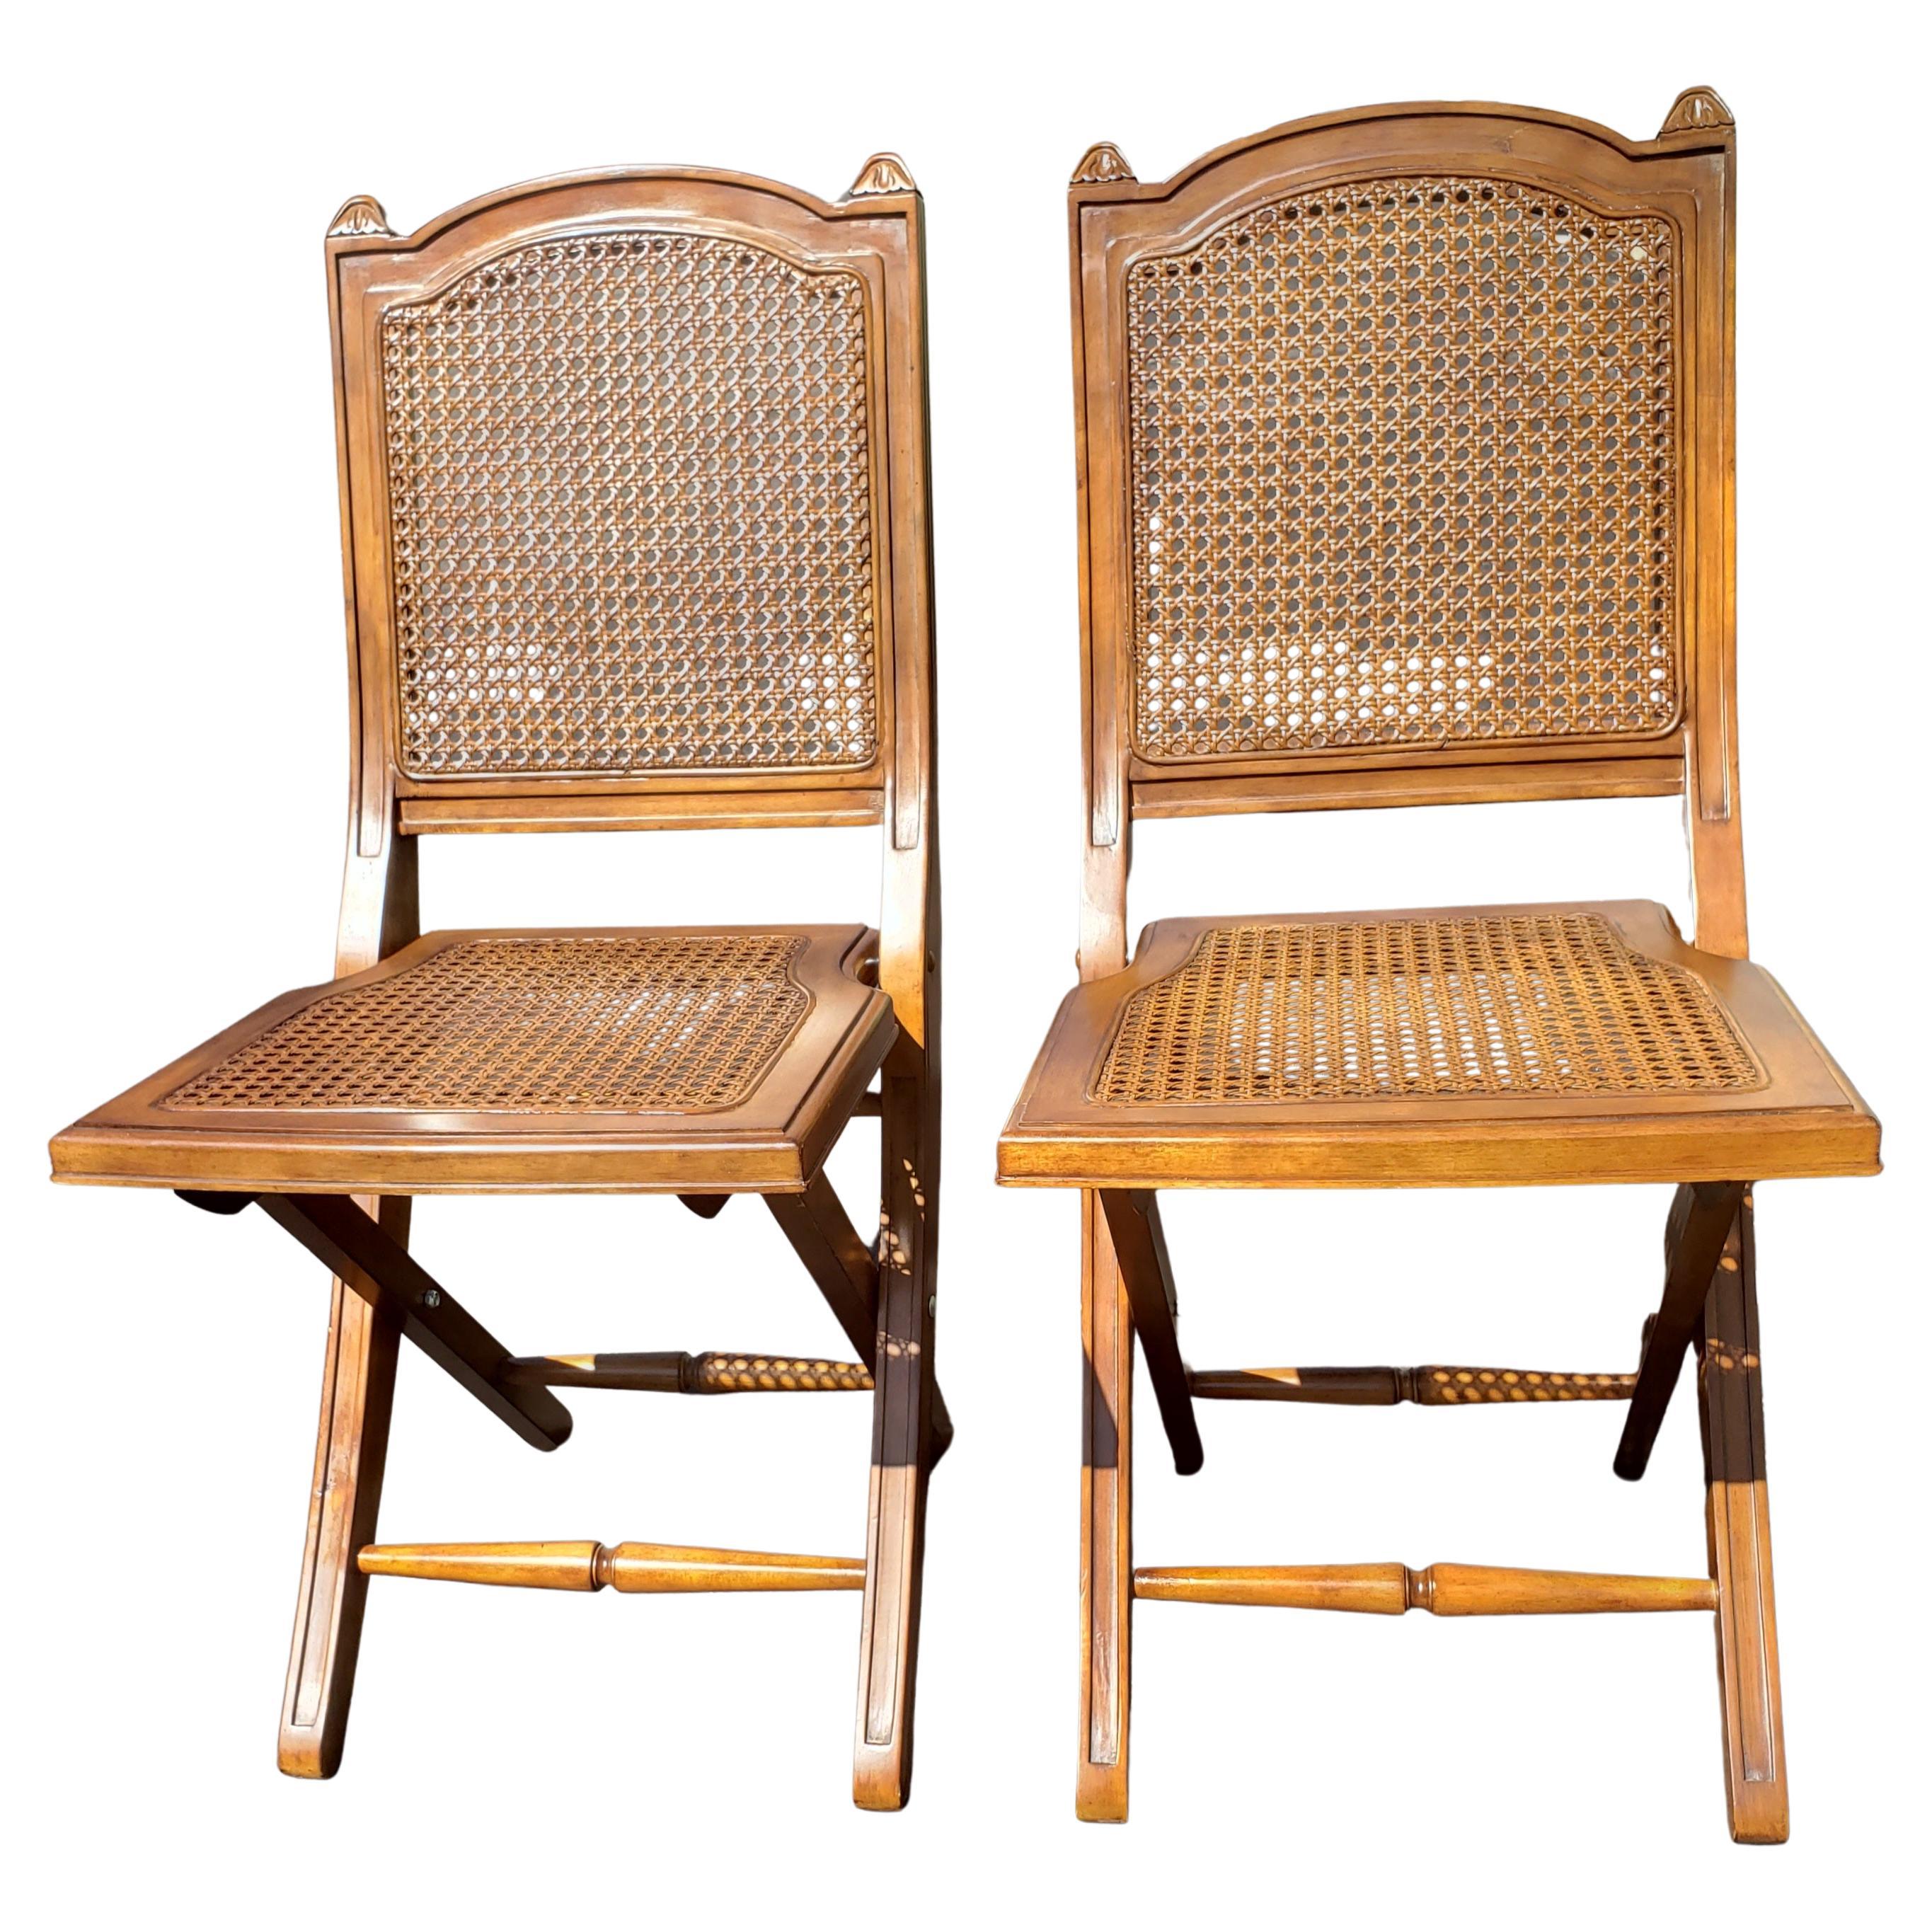 20th Century Solid Cherry and Cane Seat and Back Folding Chairs with Cushions, a Pair For Sale